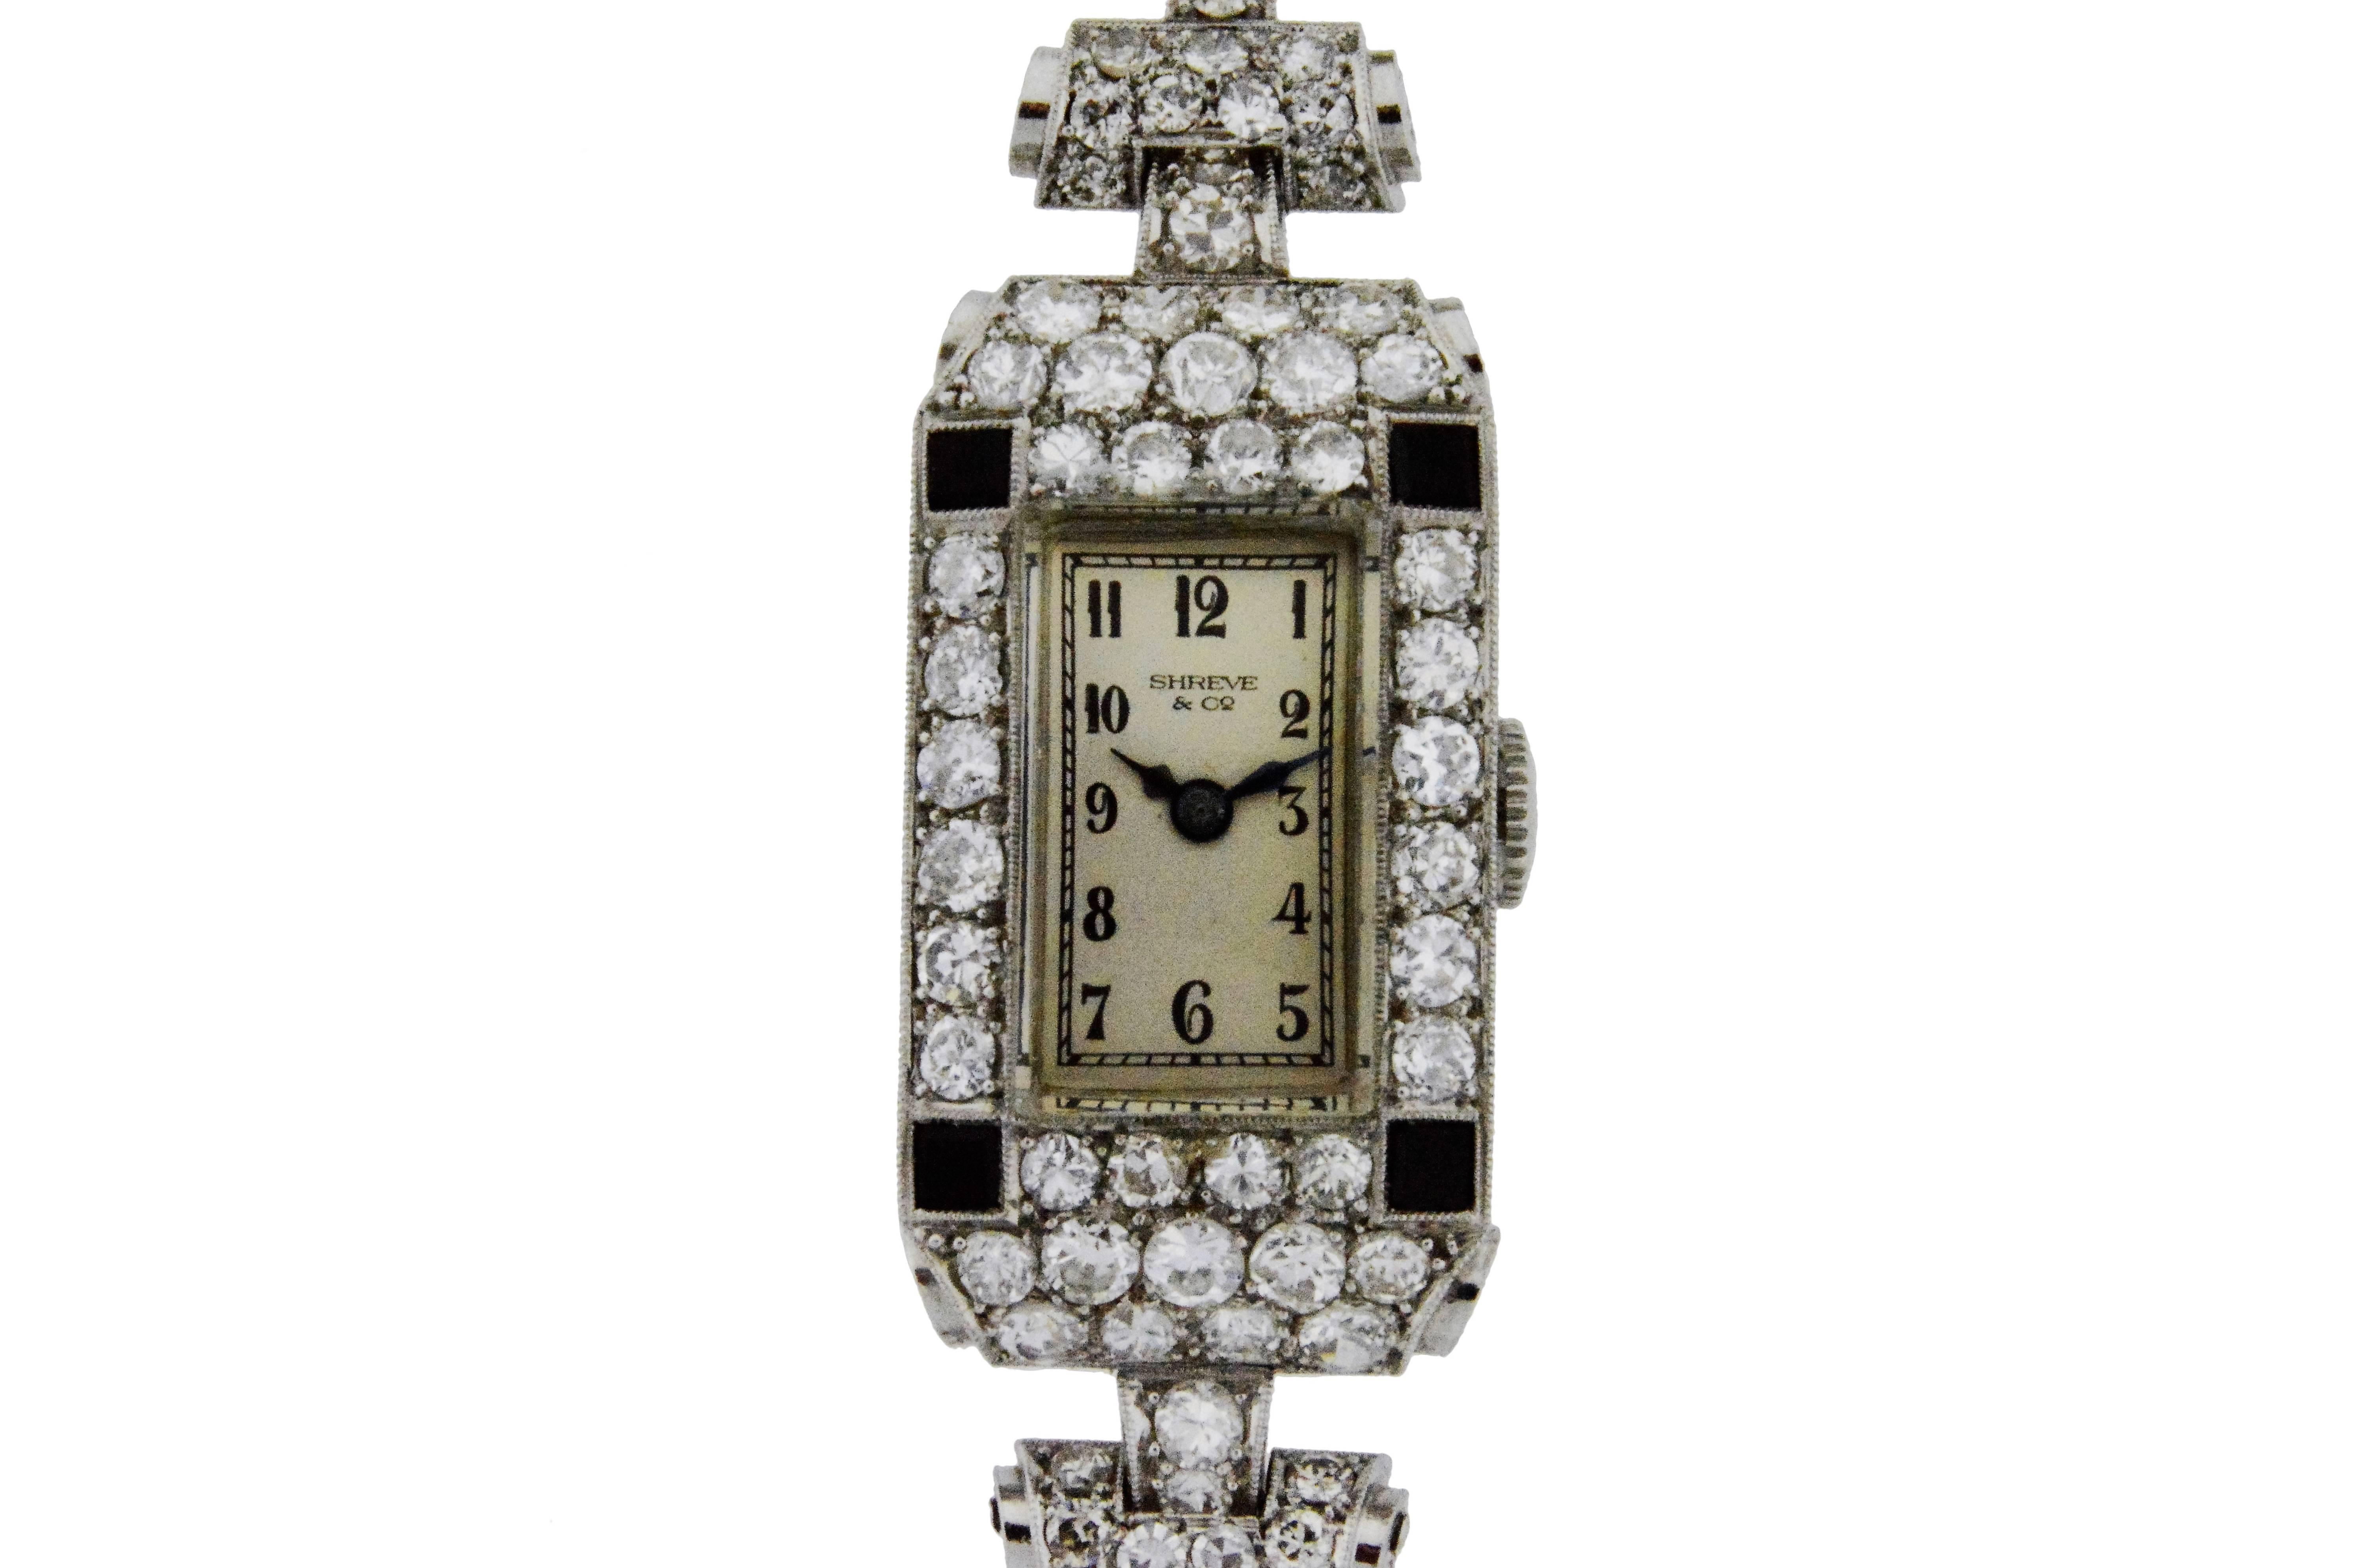 FACTORY / HOUSE: Shreve and Company / San Francisco
STYLE / REFERENCE: Art Deco / Dress Style
METAL / MATERIAL: Platinum and Diamond
DIMENSIONS:  68mm  X  16mm
CIRCA: 1930's
MOVEMENT / CALIBER: Longines / 15 Jewels / Manual Winding
DIAL / HANDS: